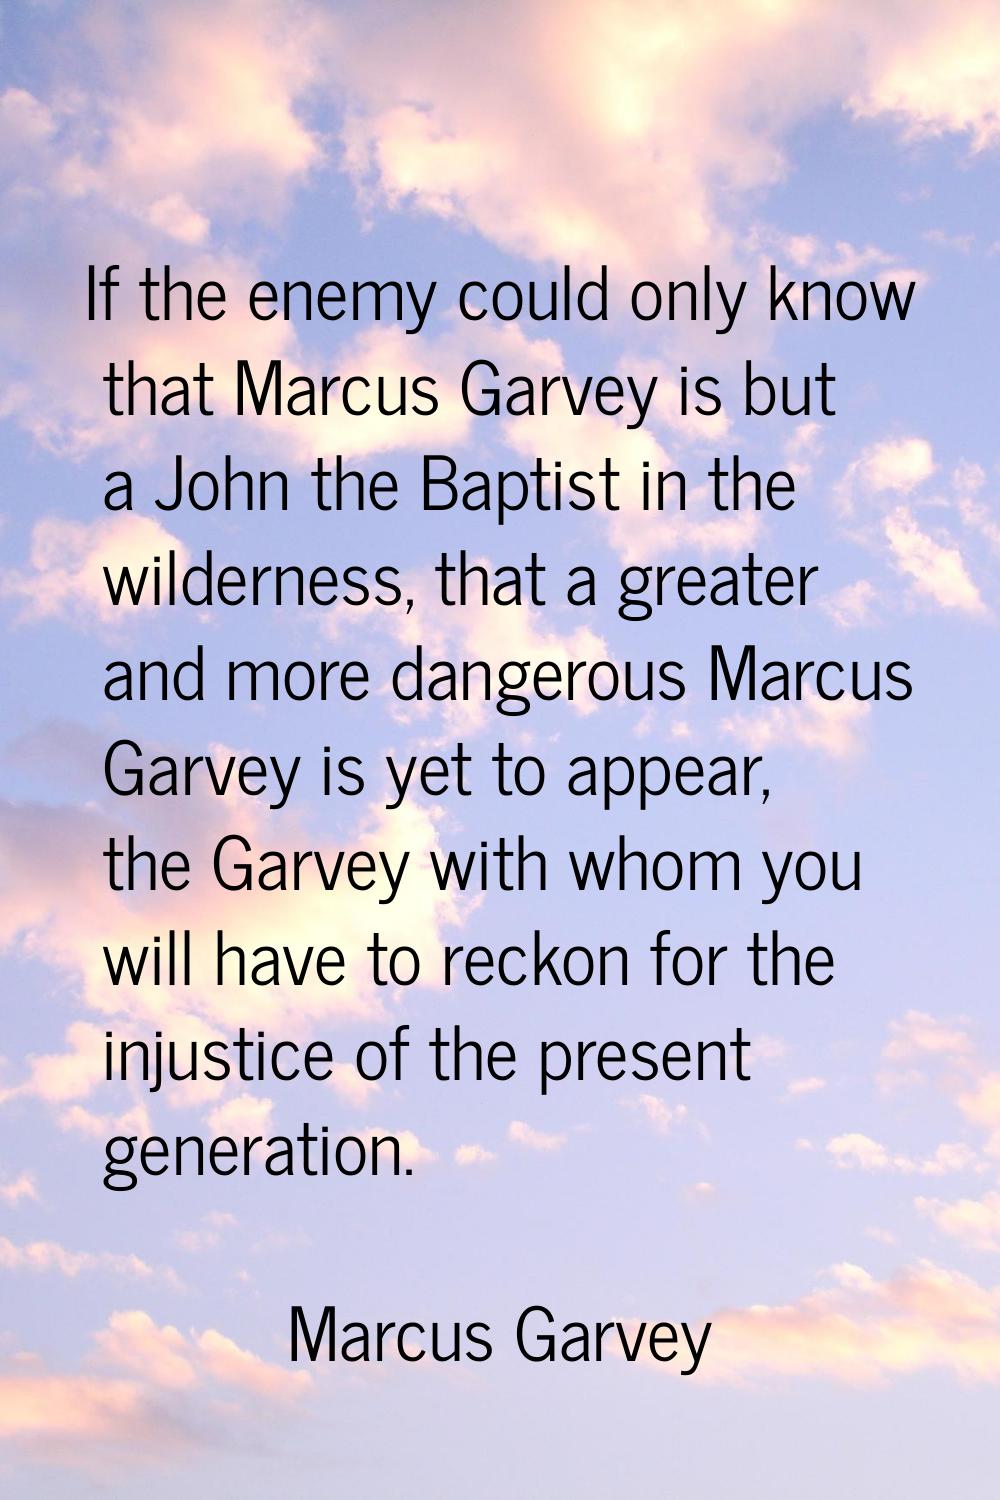 If the enemy could only know that Marcus Garvey is but a John the Baptist in the wilderness, that a